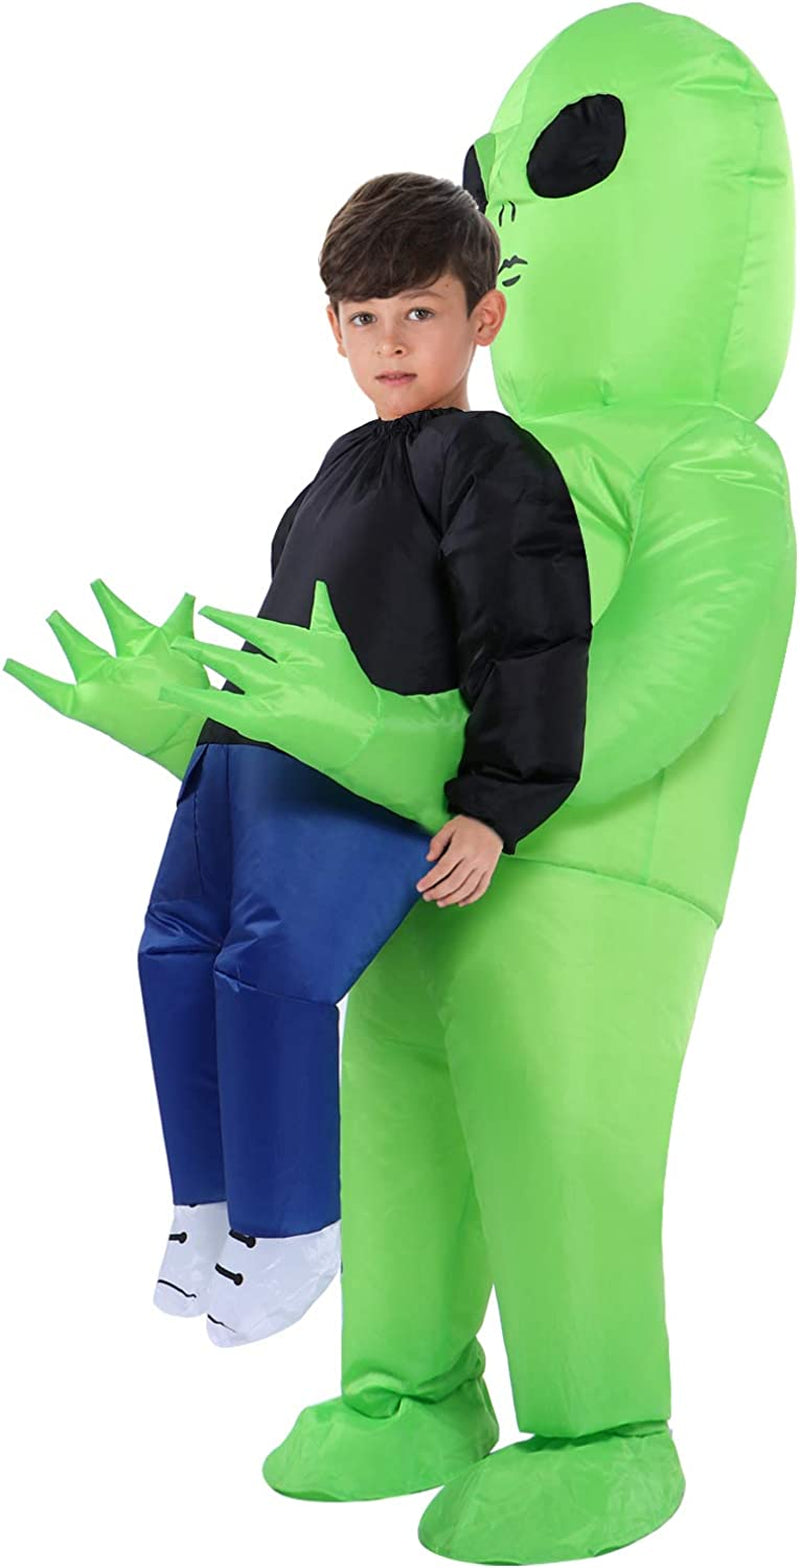 TOLOCO Inflatable Costume for Kid, Inflatable Alien Costume Kids, Alien Holding Person Costume, Halloween Blow up Costume